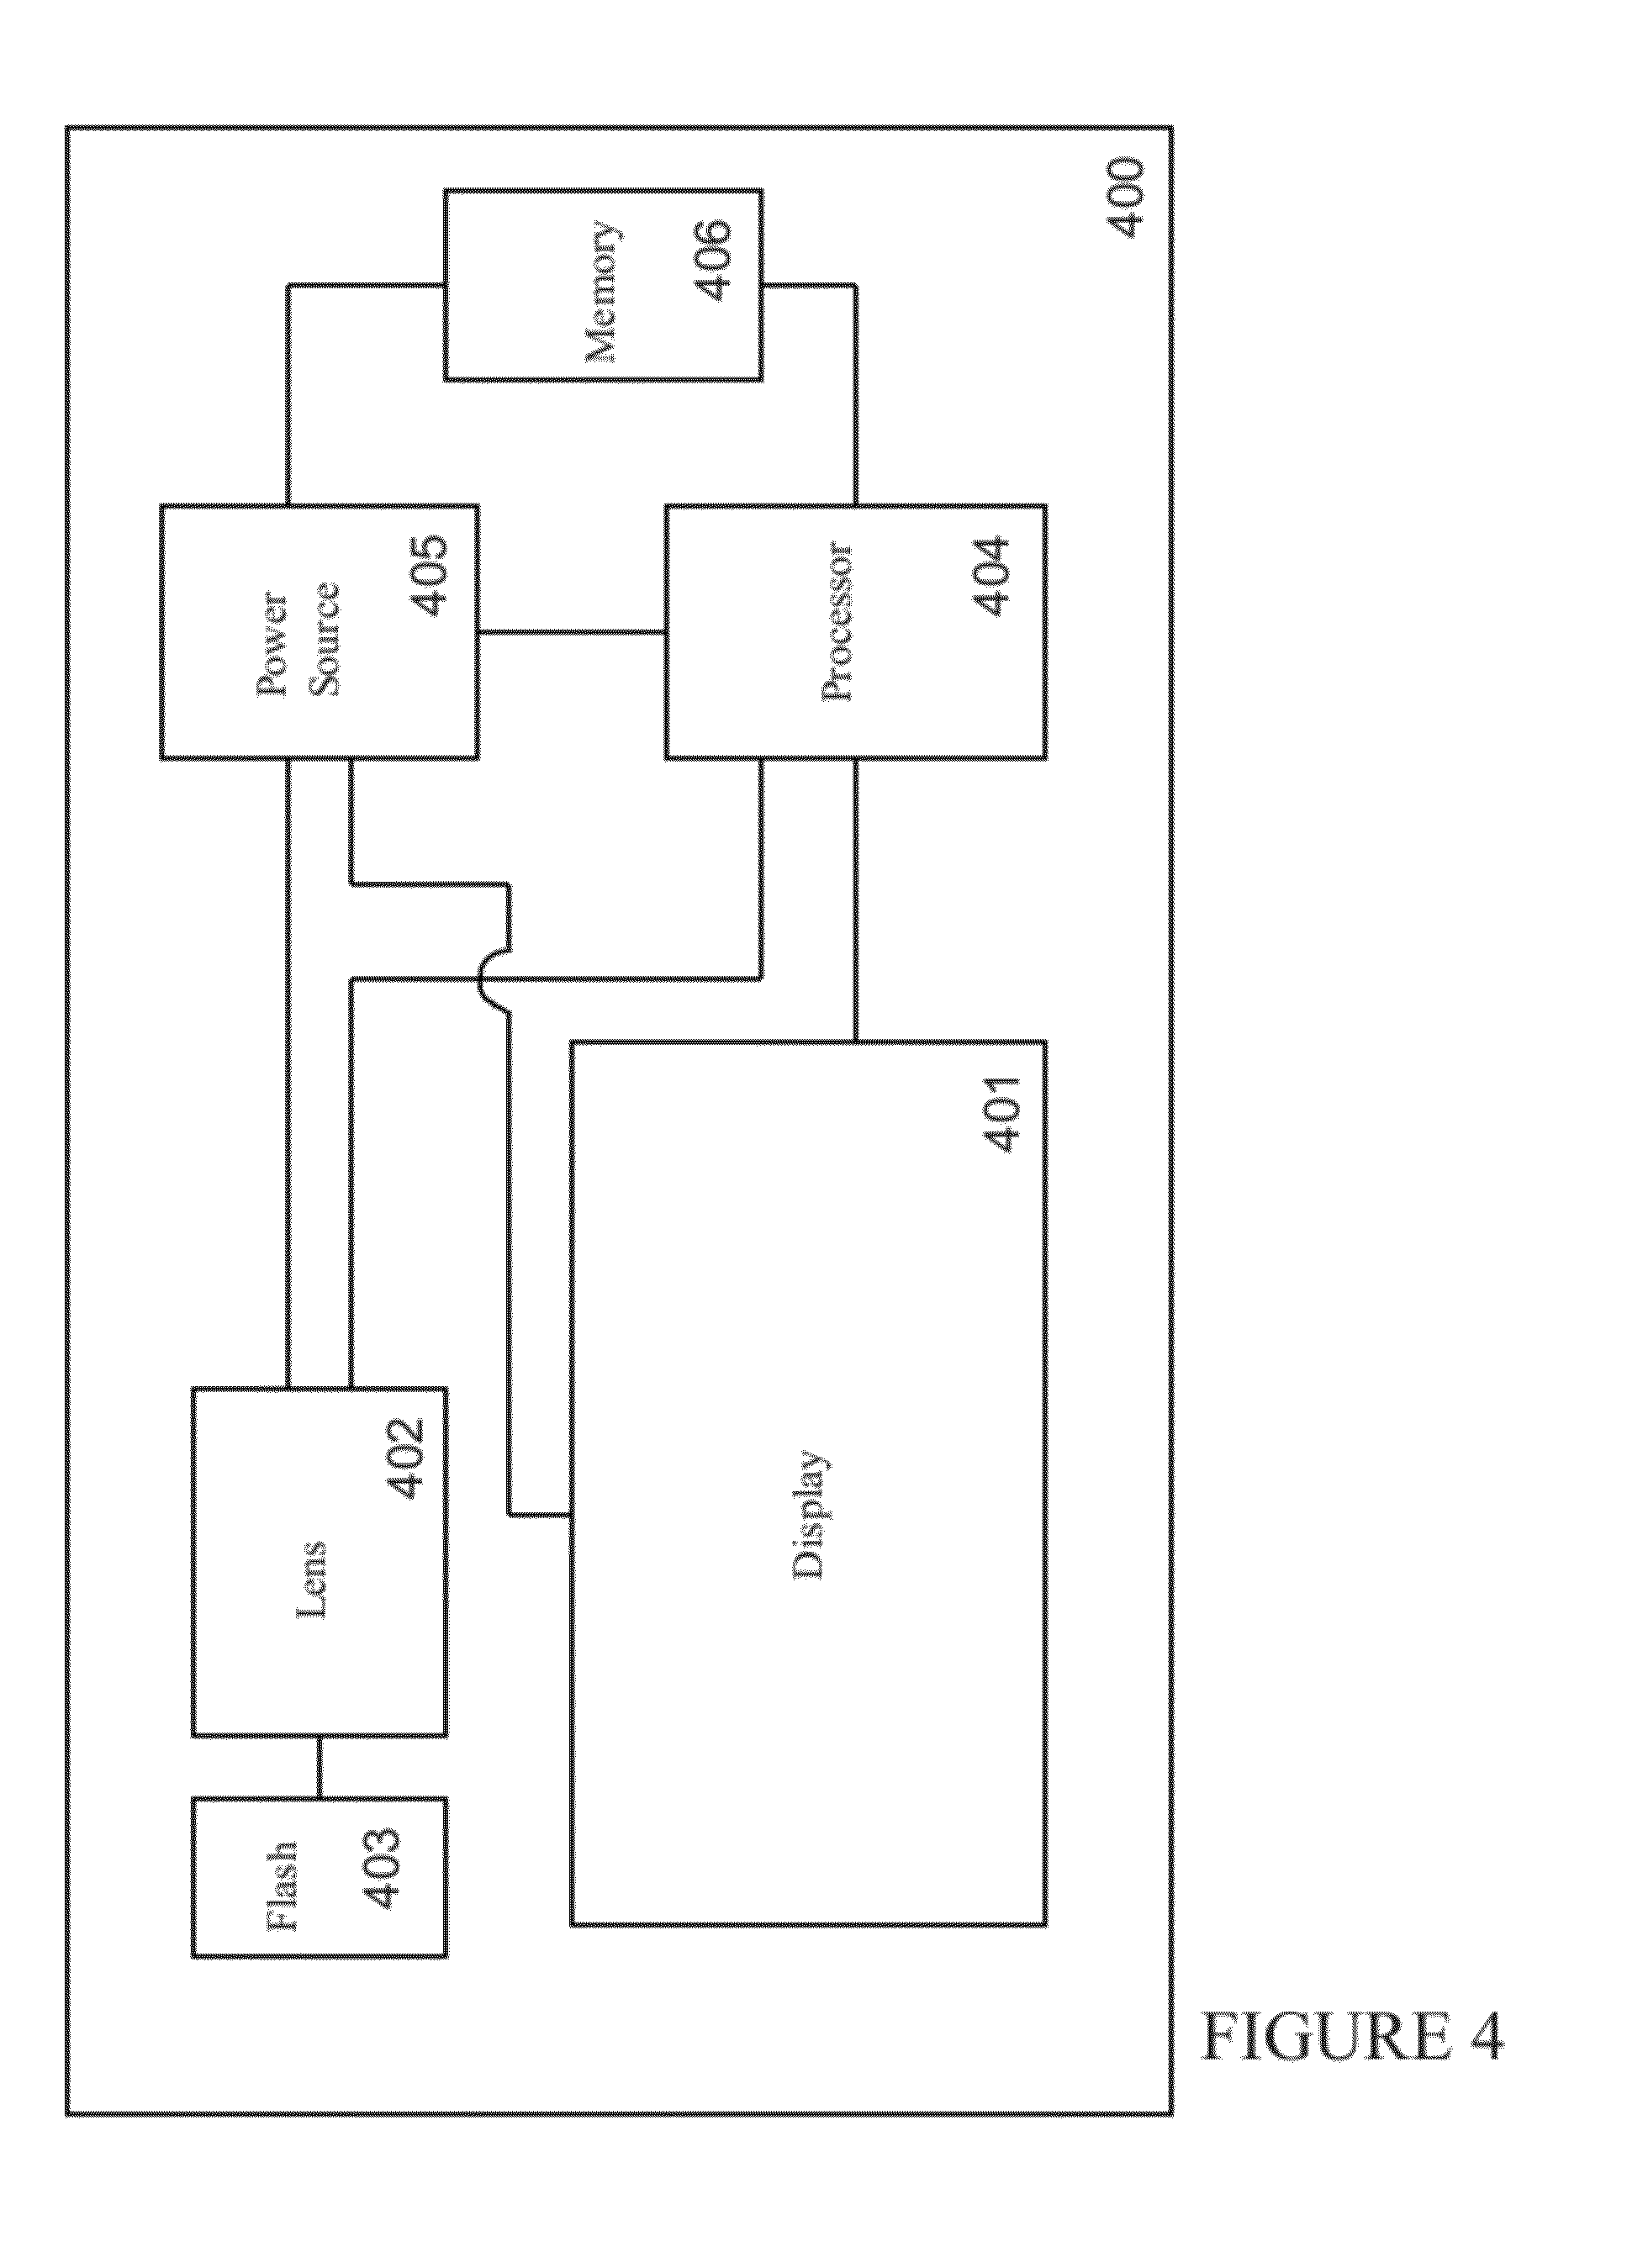 Method and apparatus for dynamically recording, editing and combining multiple live video clips and still photographs into a finished composition